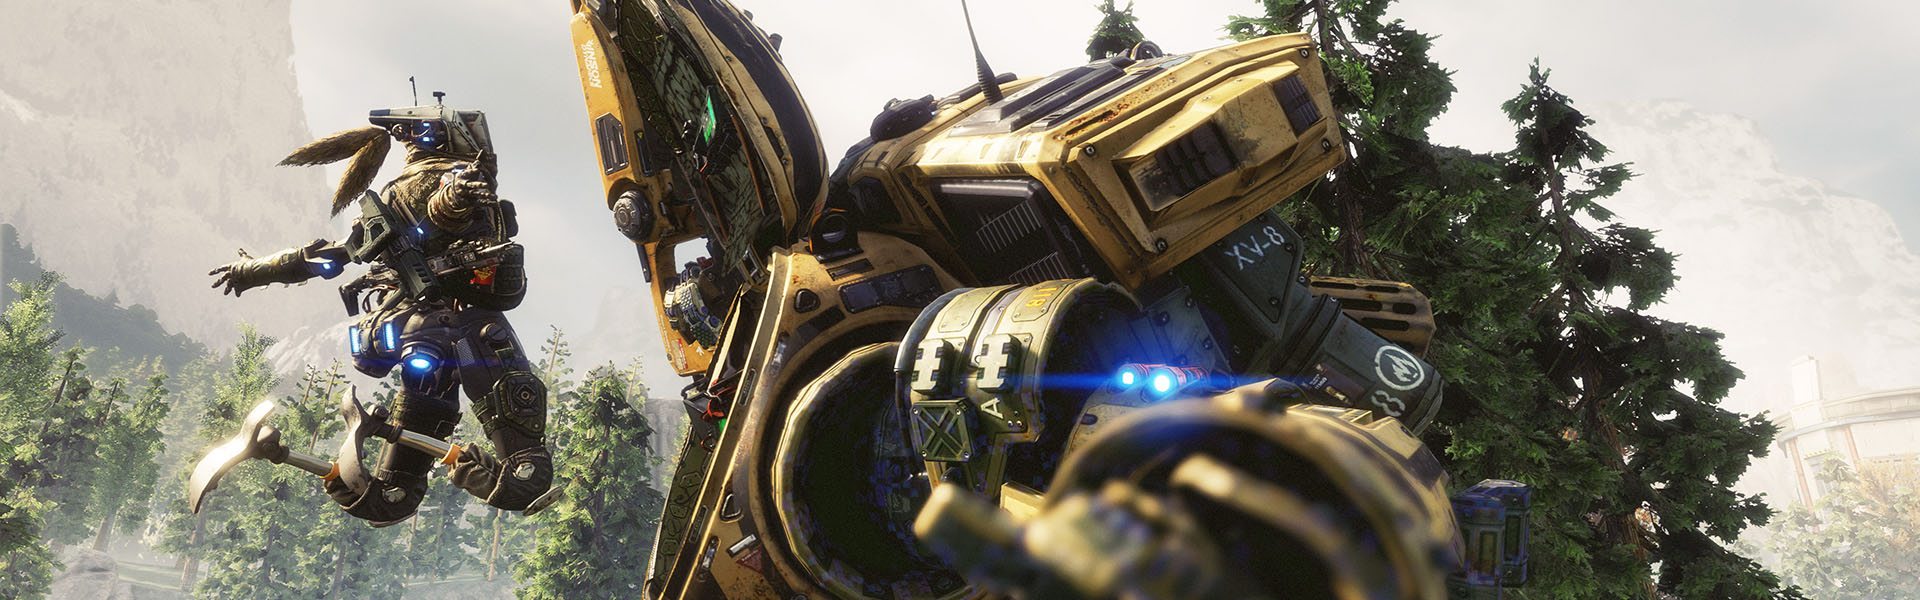 Standby for Titanfall 2 On October 12